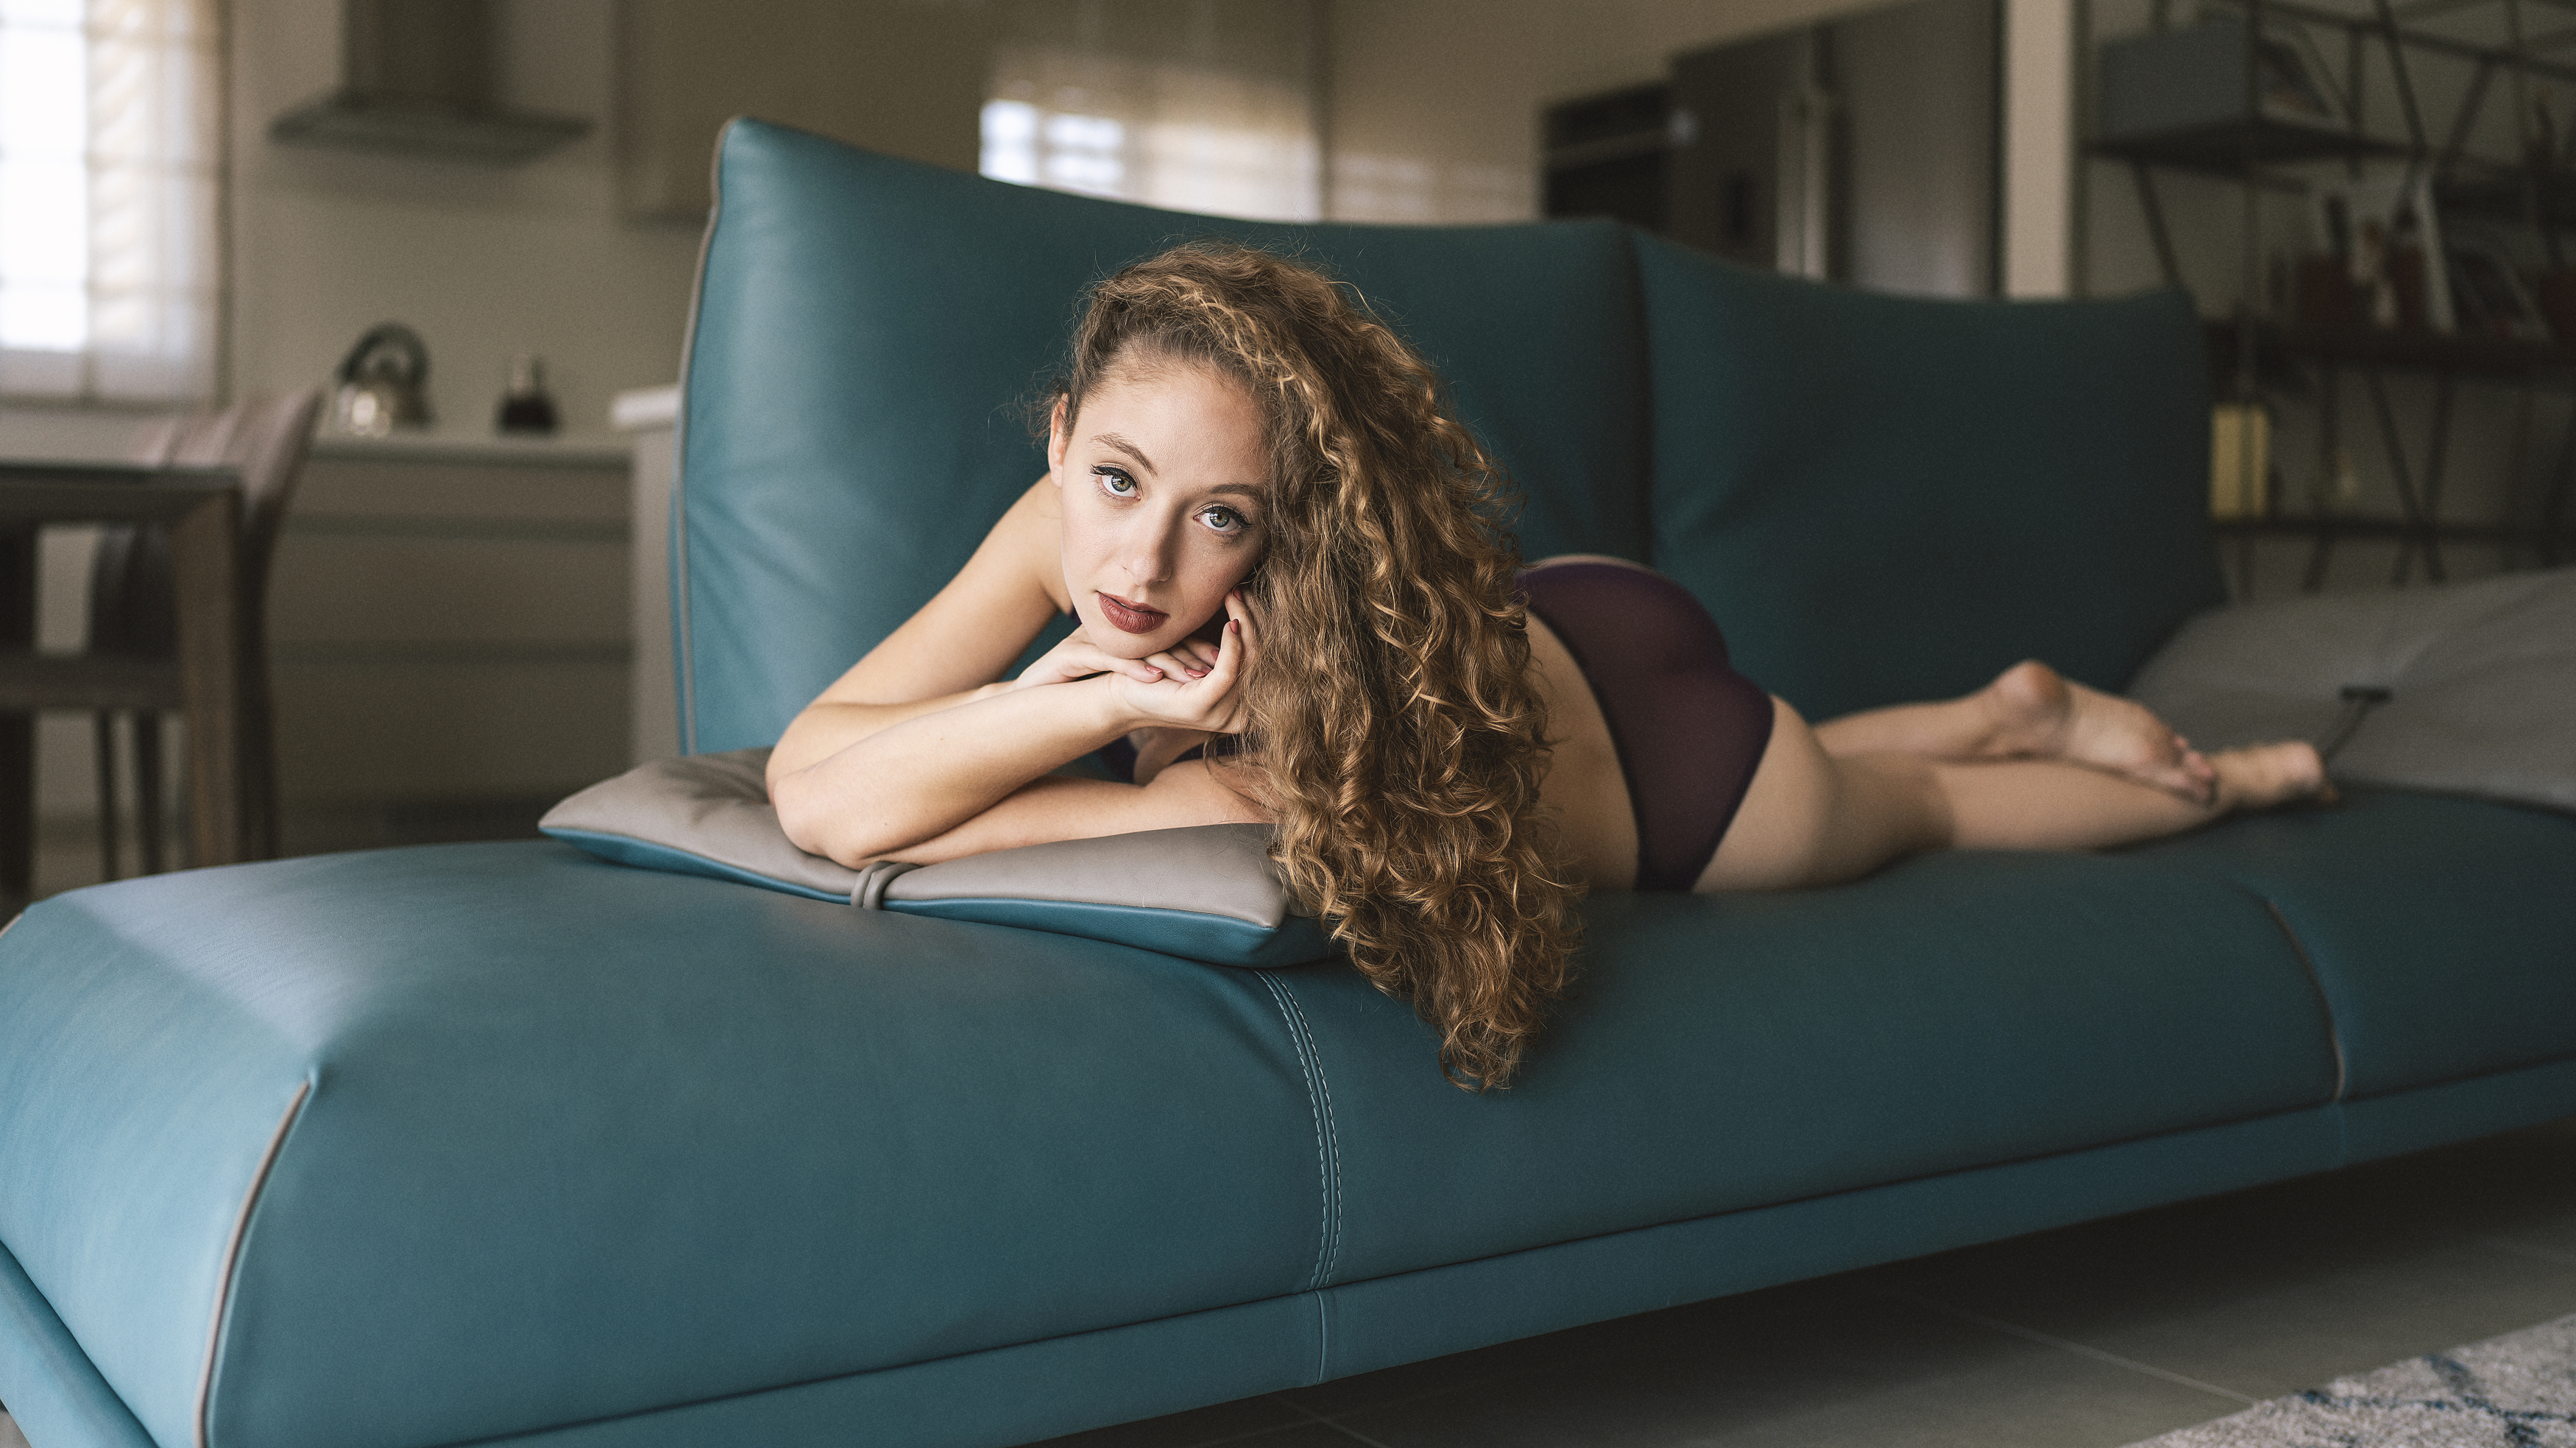 attractive, back view, beautiful woman, beauty, couch, female, femininity, grace, indoors, lifestyles, lingerie, looking at camera, one person, panties, portrait, pose, relaxation, salon, seductive women, sensuality, sofa, underwear, windows, young women, Alex Tsarfin